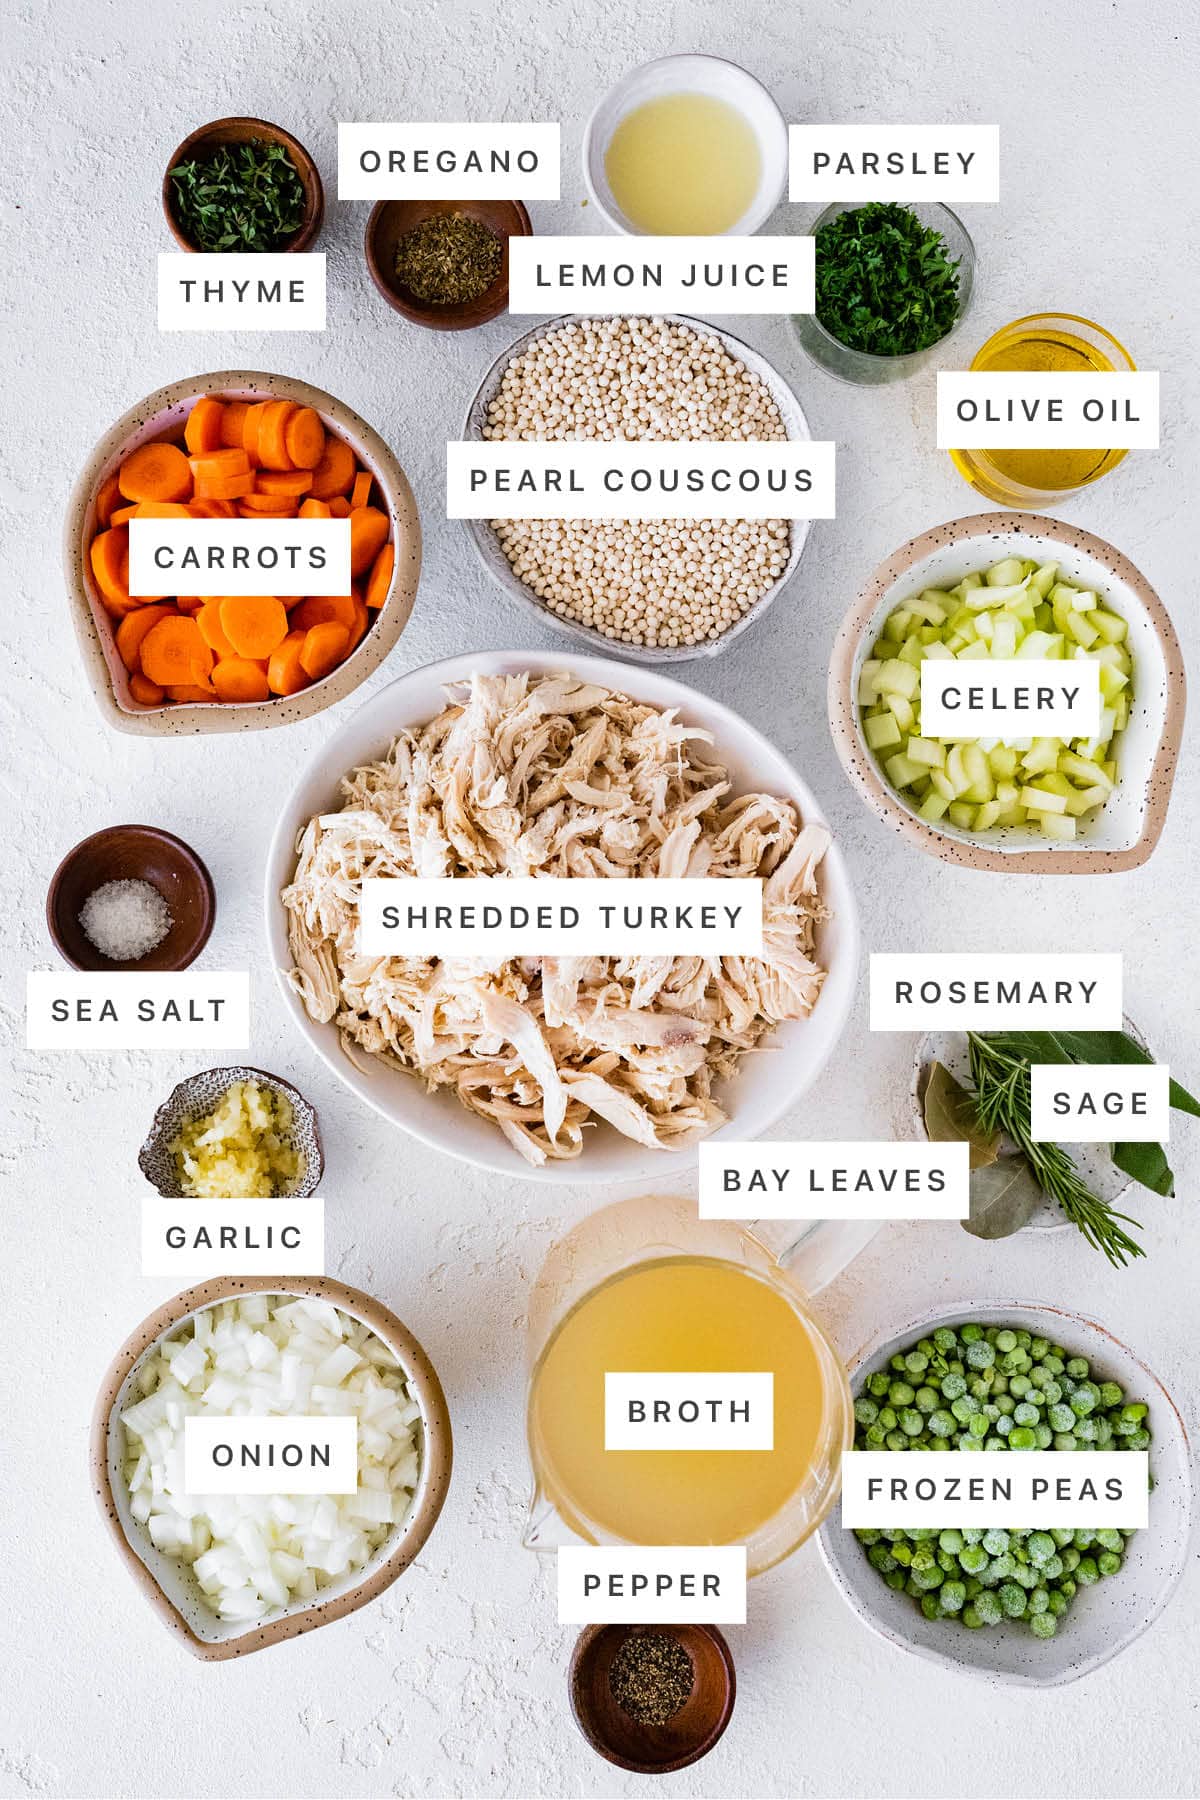 Ingredients measured out to make Turkey Soup: thyme, oregano, lemon juice, parsley, pearl couscous, carrots, olive oil, celery, sea salt, shredded turkey, rosemary, sage, bay leaves, garlic, onion, broth, pepper and frozen peas.